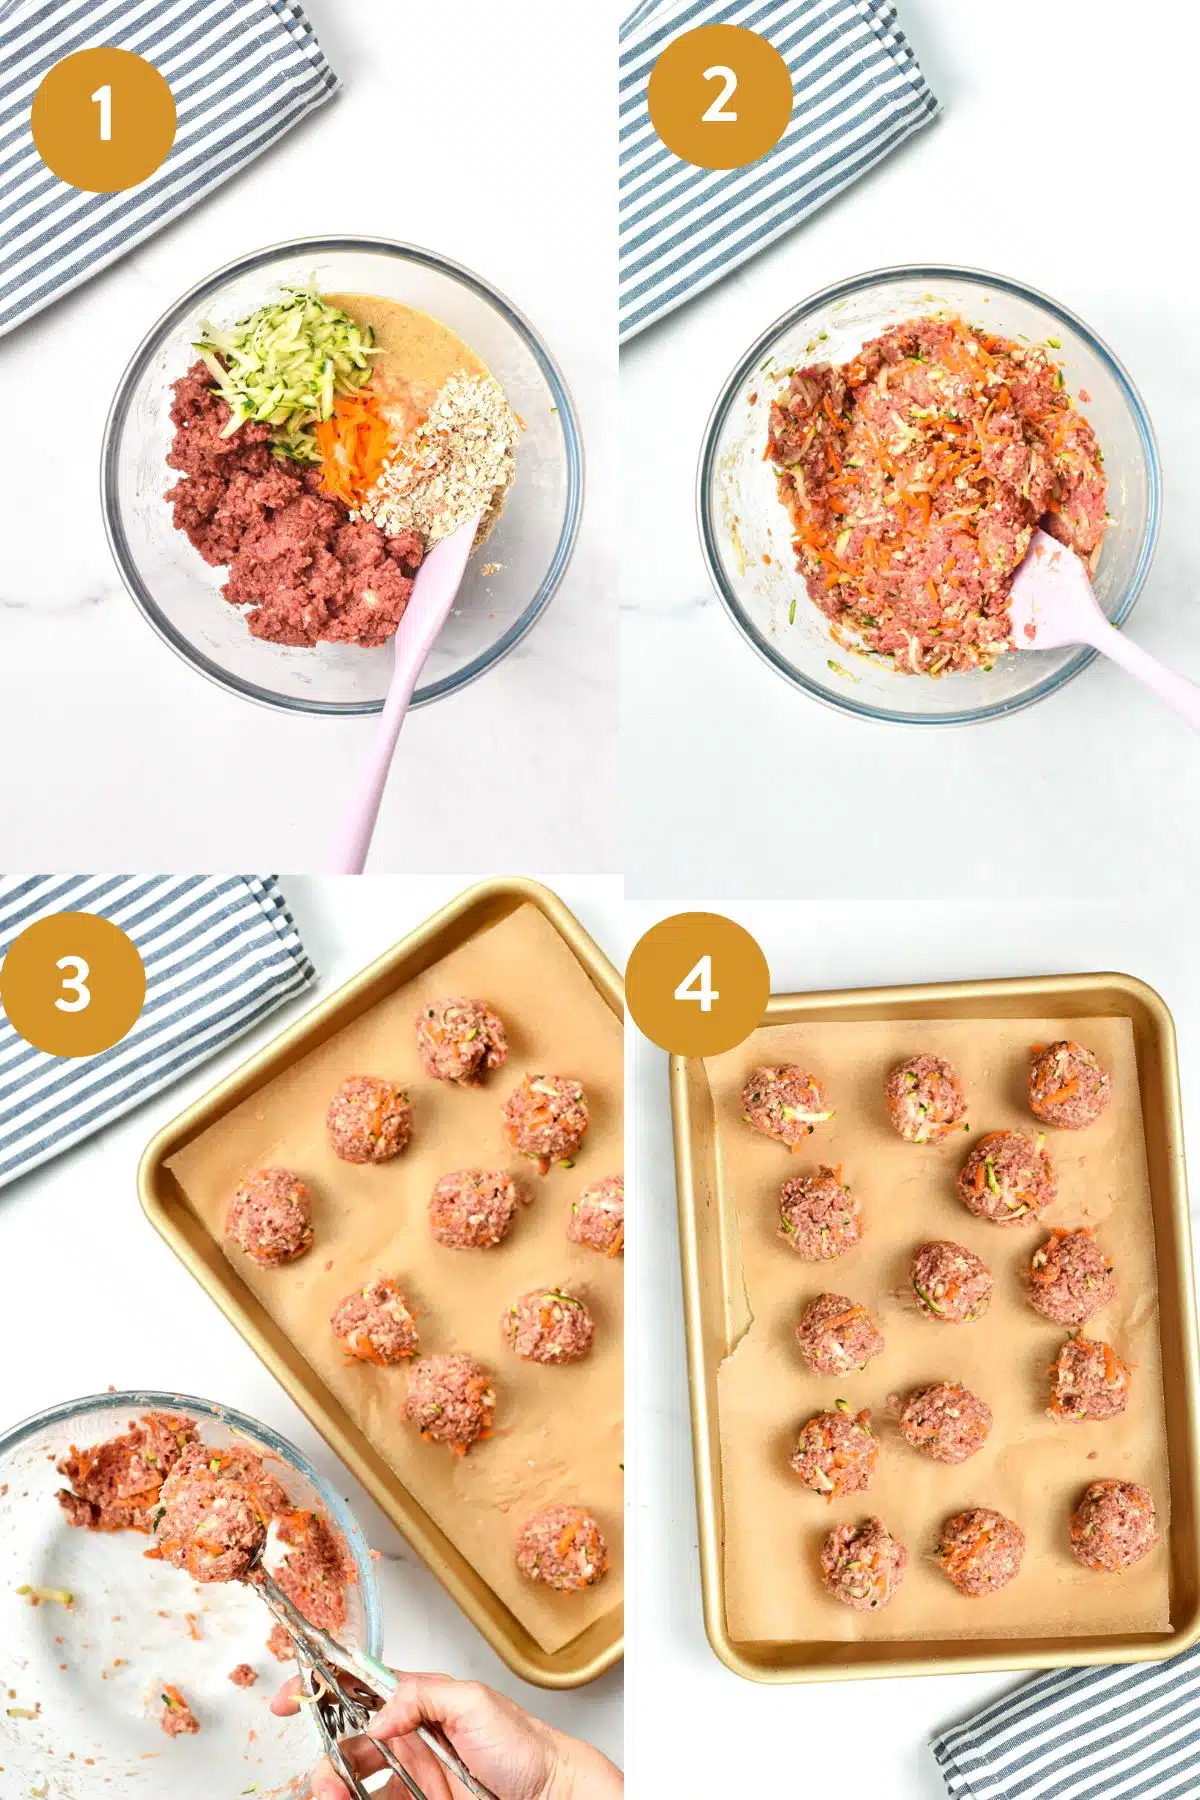 steps by steps picture to make  meatballs for dogs